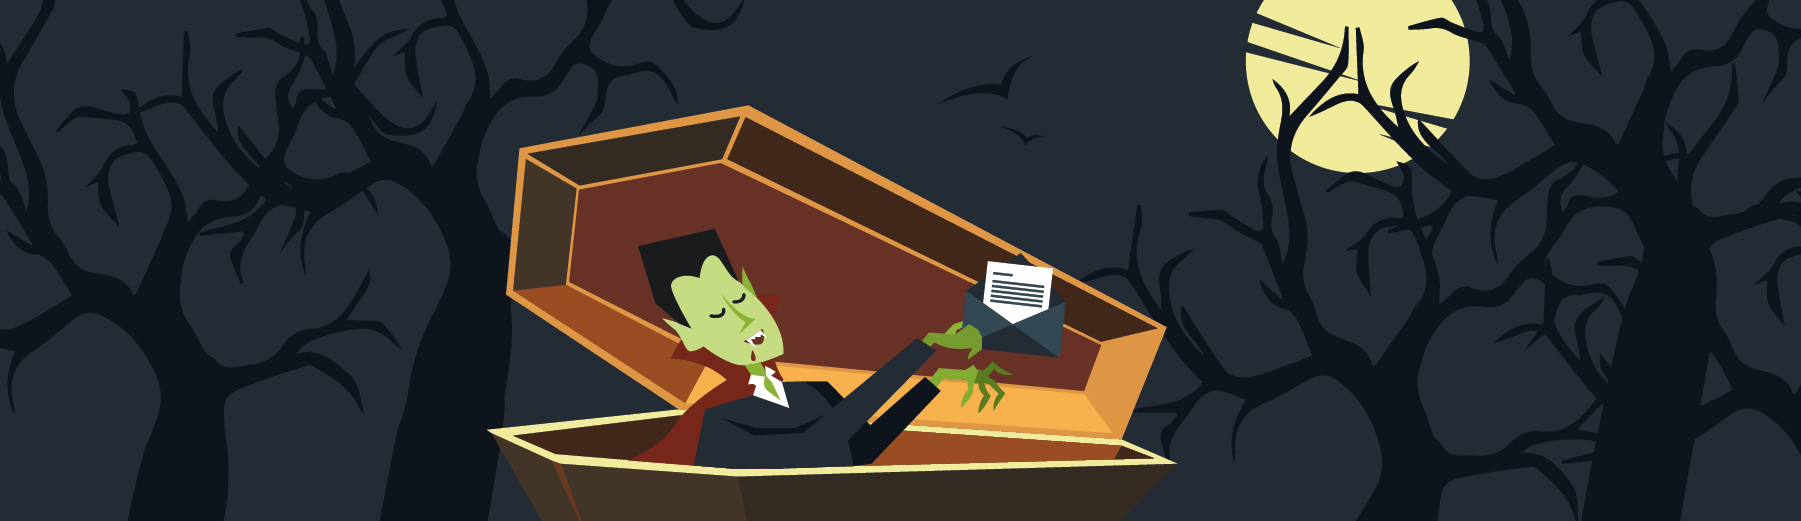 Dracula may suck, but email marketing best practices don't.